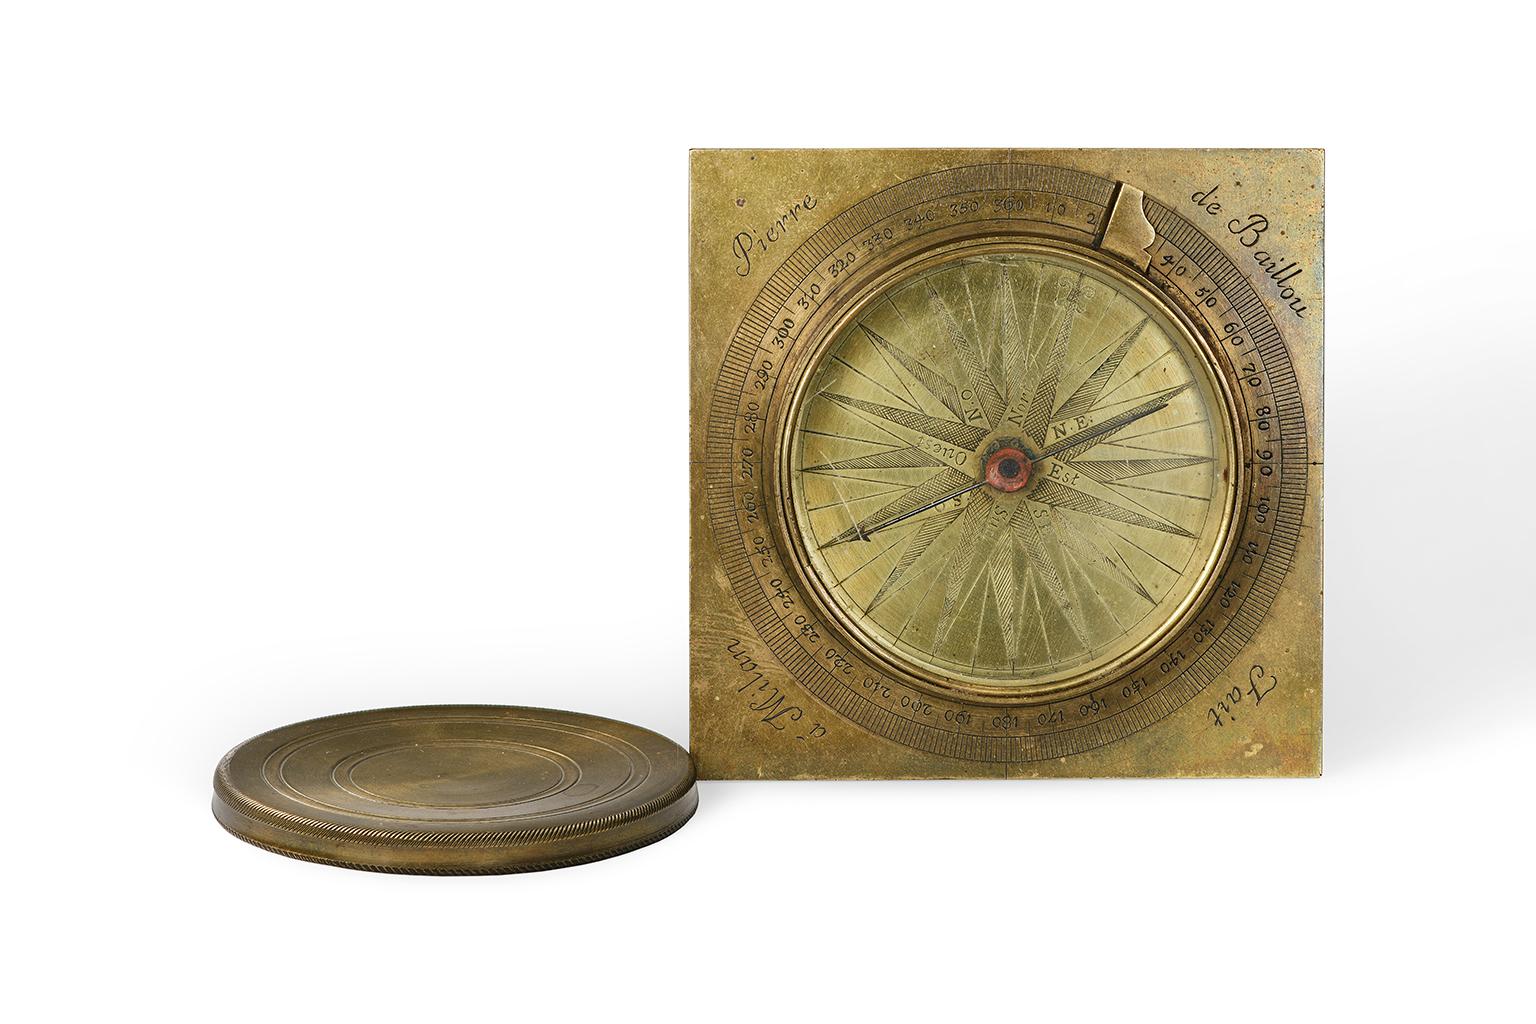 Compass
Pierre de Baillou
Milan, first quarter of the 18th century
Brass, steel and glass
It measures 3.81 in x 3.81 x 0.59 (9.7 cm x 9.7 x 1.5)
It weights 0.57 lb (259 g)
State of conservation: some signs of use and some slight scratches on both